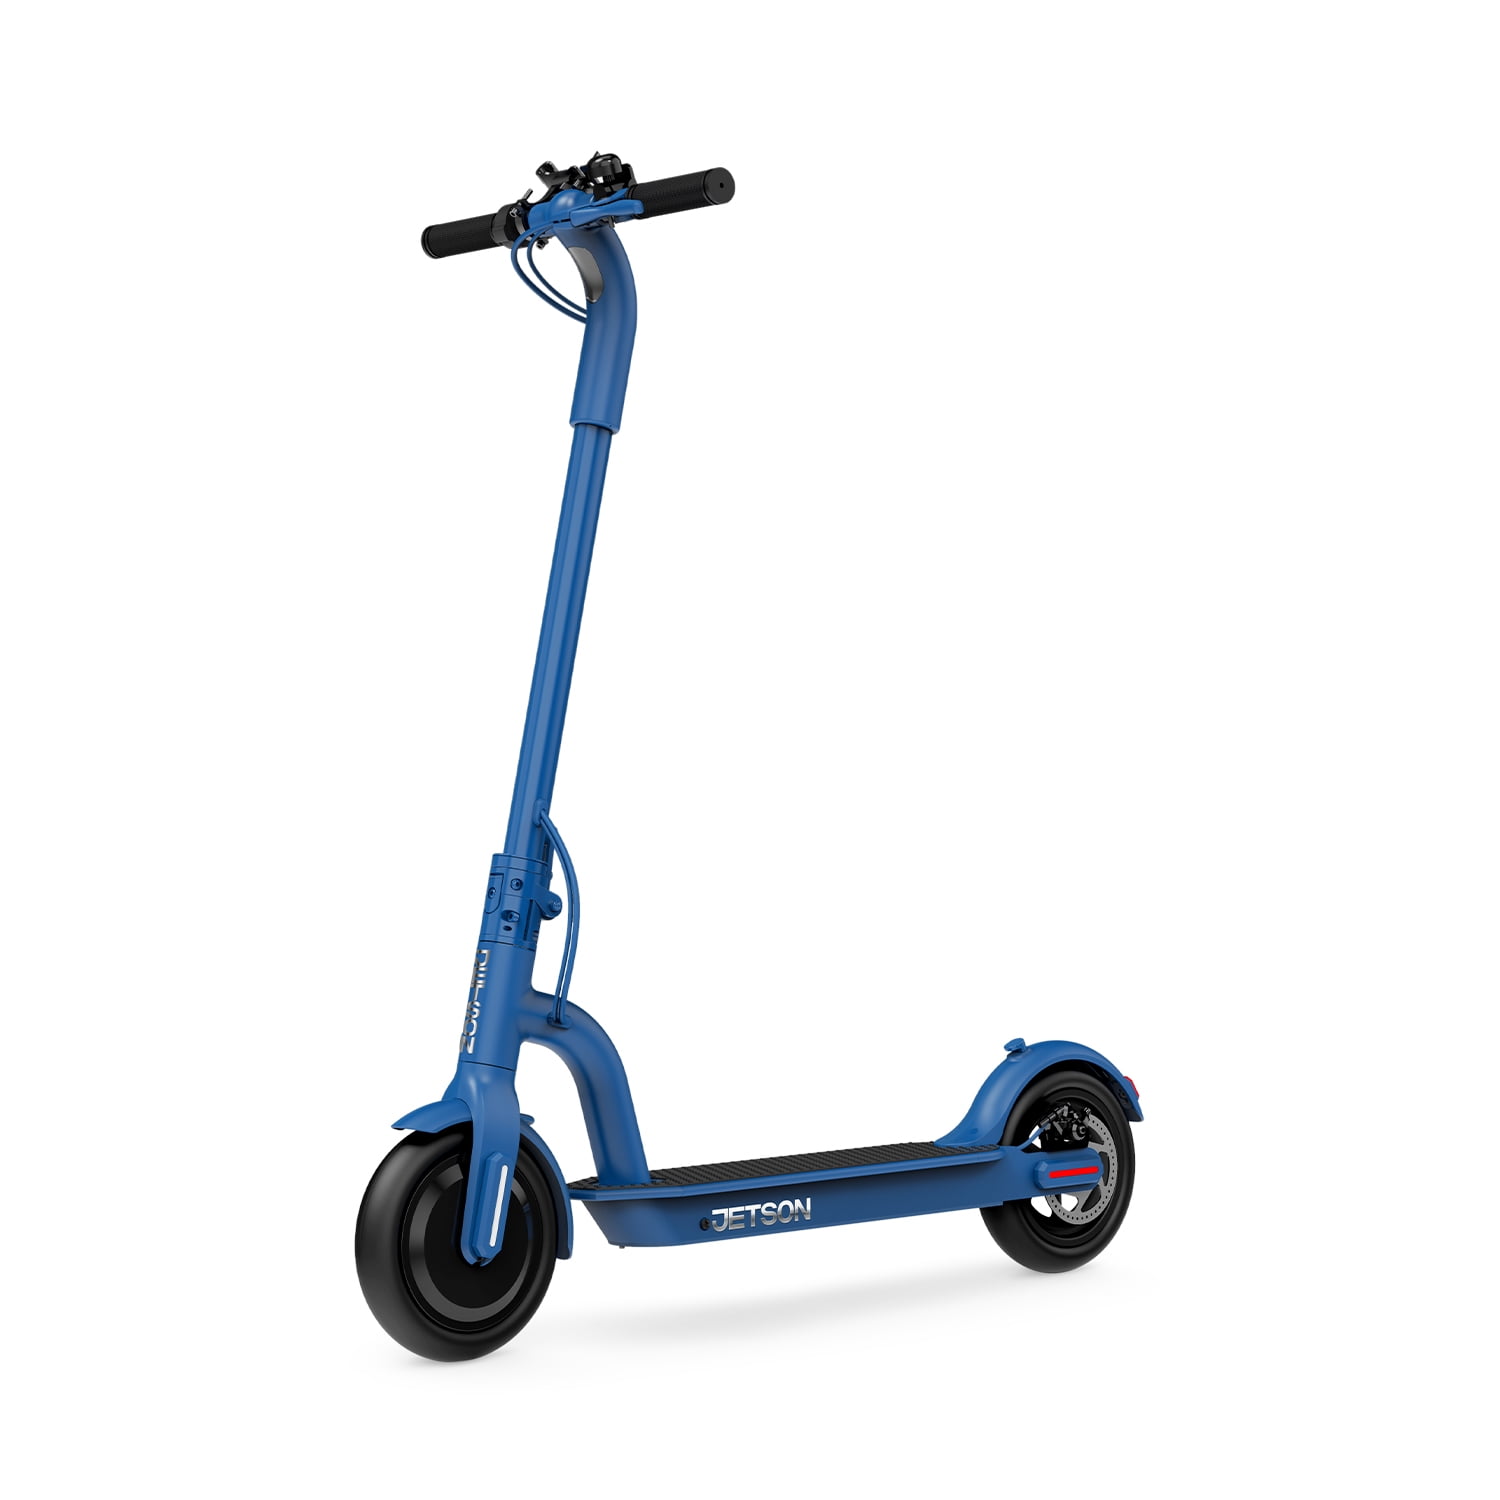 Jetson Eris Adult Electric Scooter | Limit 220 lb, Ages 12+ | Blue | 8.5” Wheel | Folding, LCD Display, Phone Holder |Top Speed of 14 MPH | Range of 12 Miles | Handbrake | 5 Hr Charge Time - Walmart.com